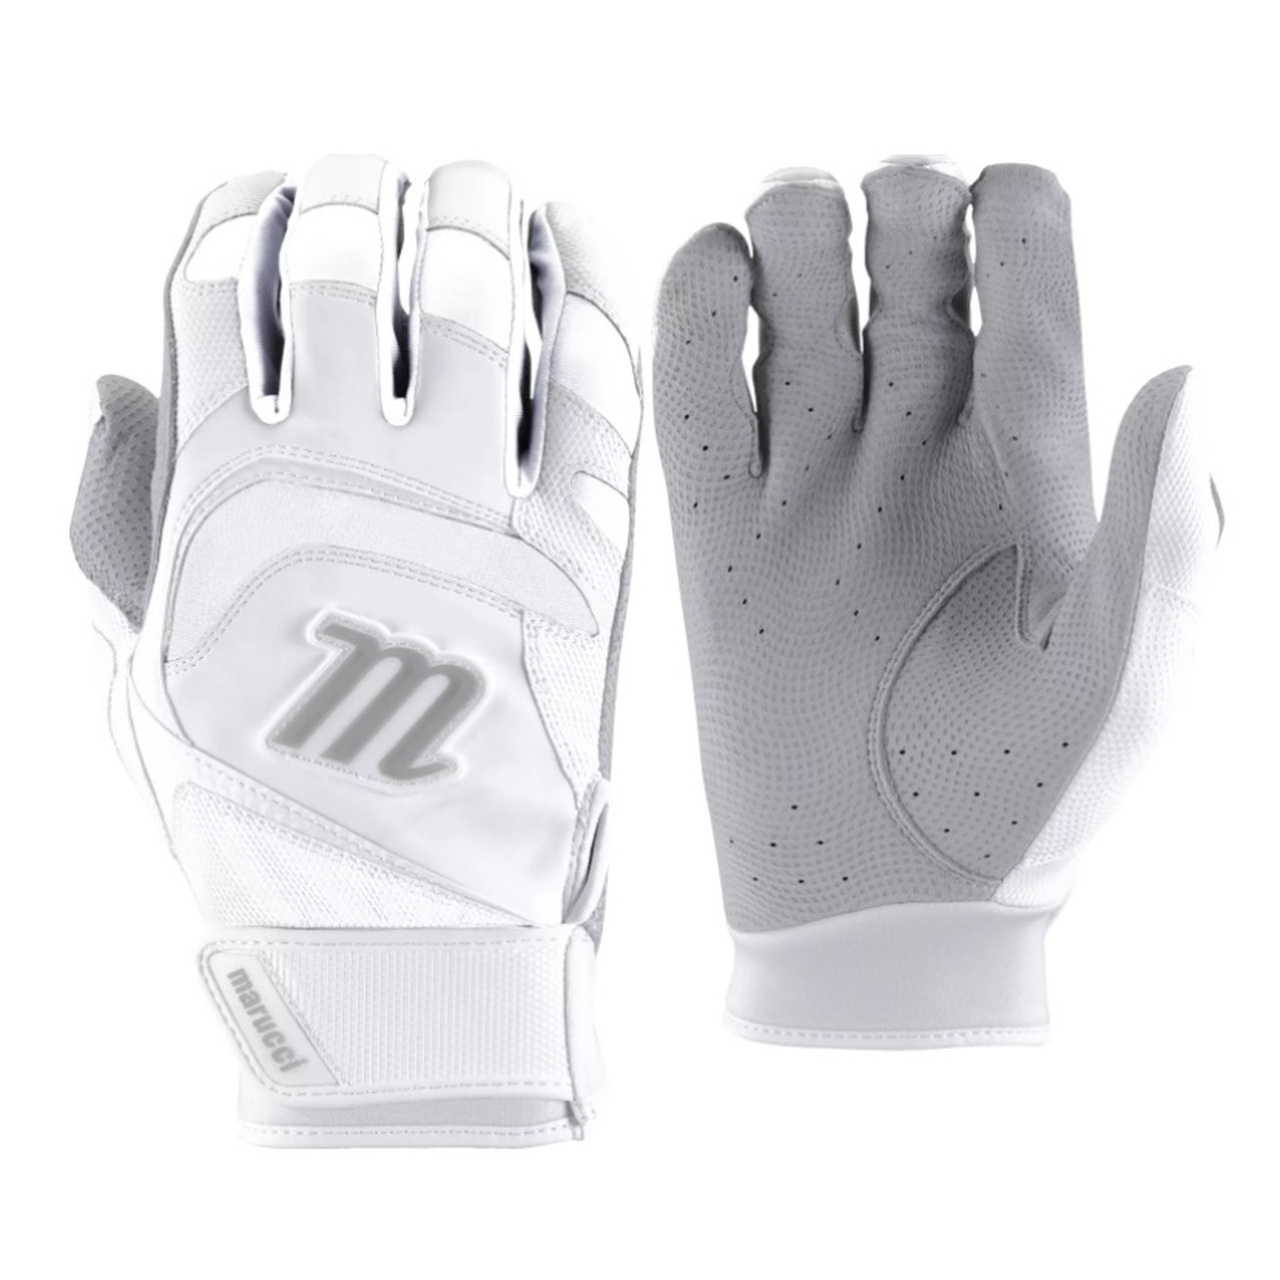 marucci-2021-signature-batting-glove-white-white-adult-small MBGSGN3-WW-AS Marucci   Digitally embossed perforated cabretta sheepskin palm provides maximum grip and